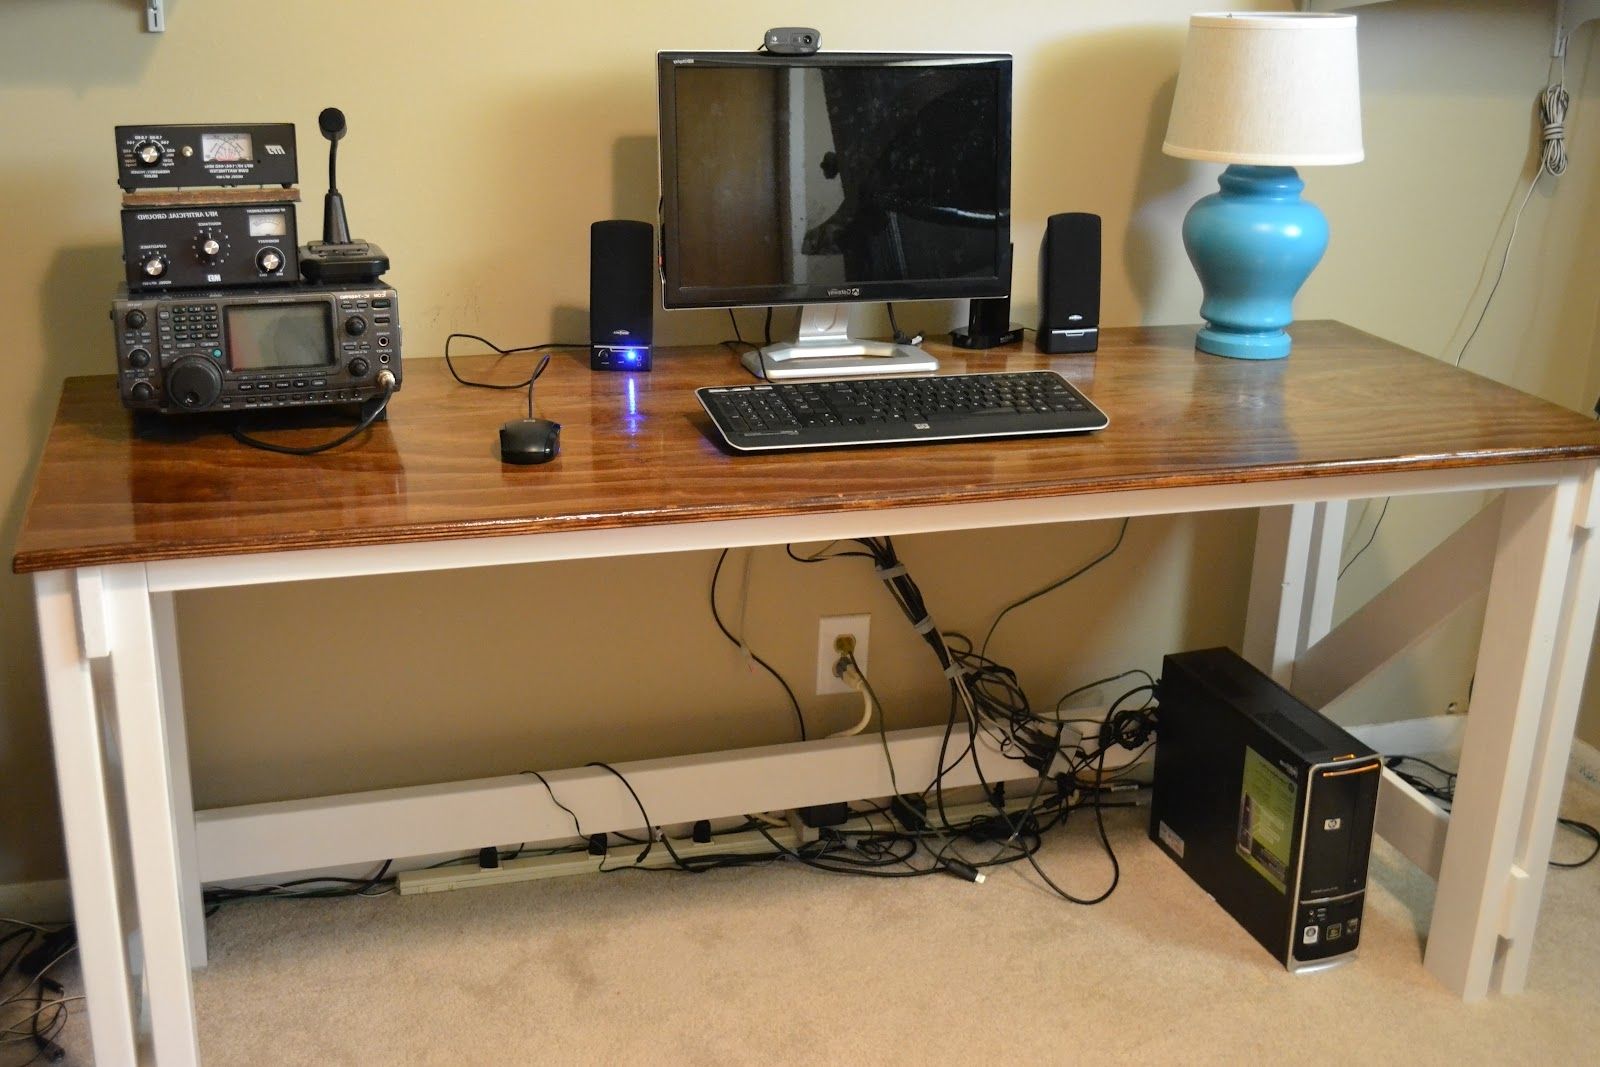 Large Computer Desks For Widely Used Homemade Computer Desk – Home Design And Decor (View 12 of 20)